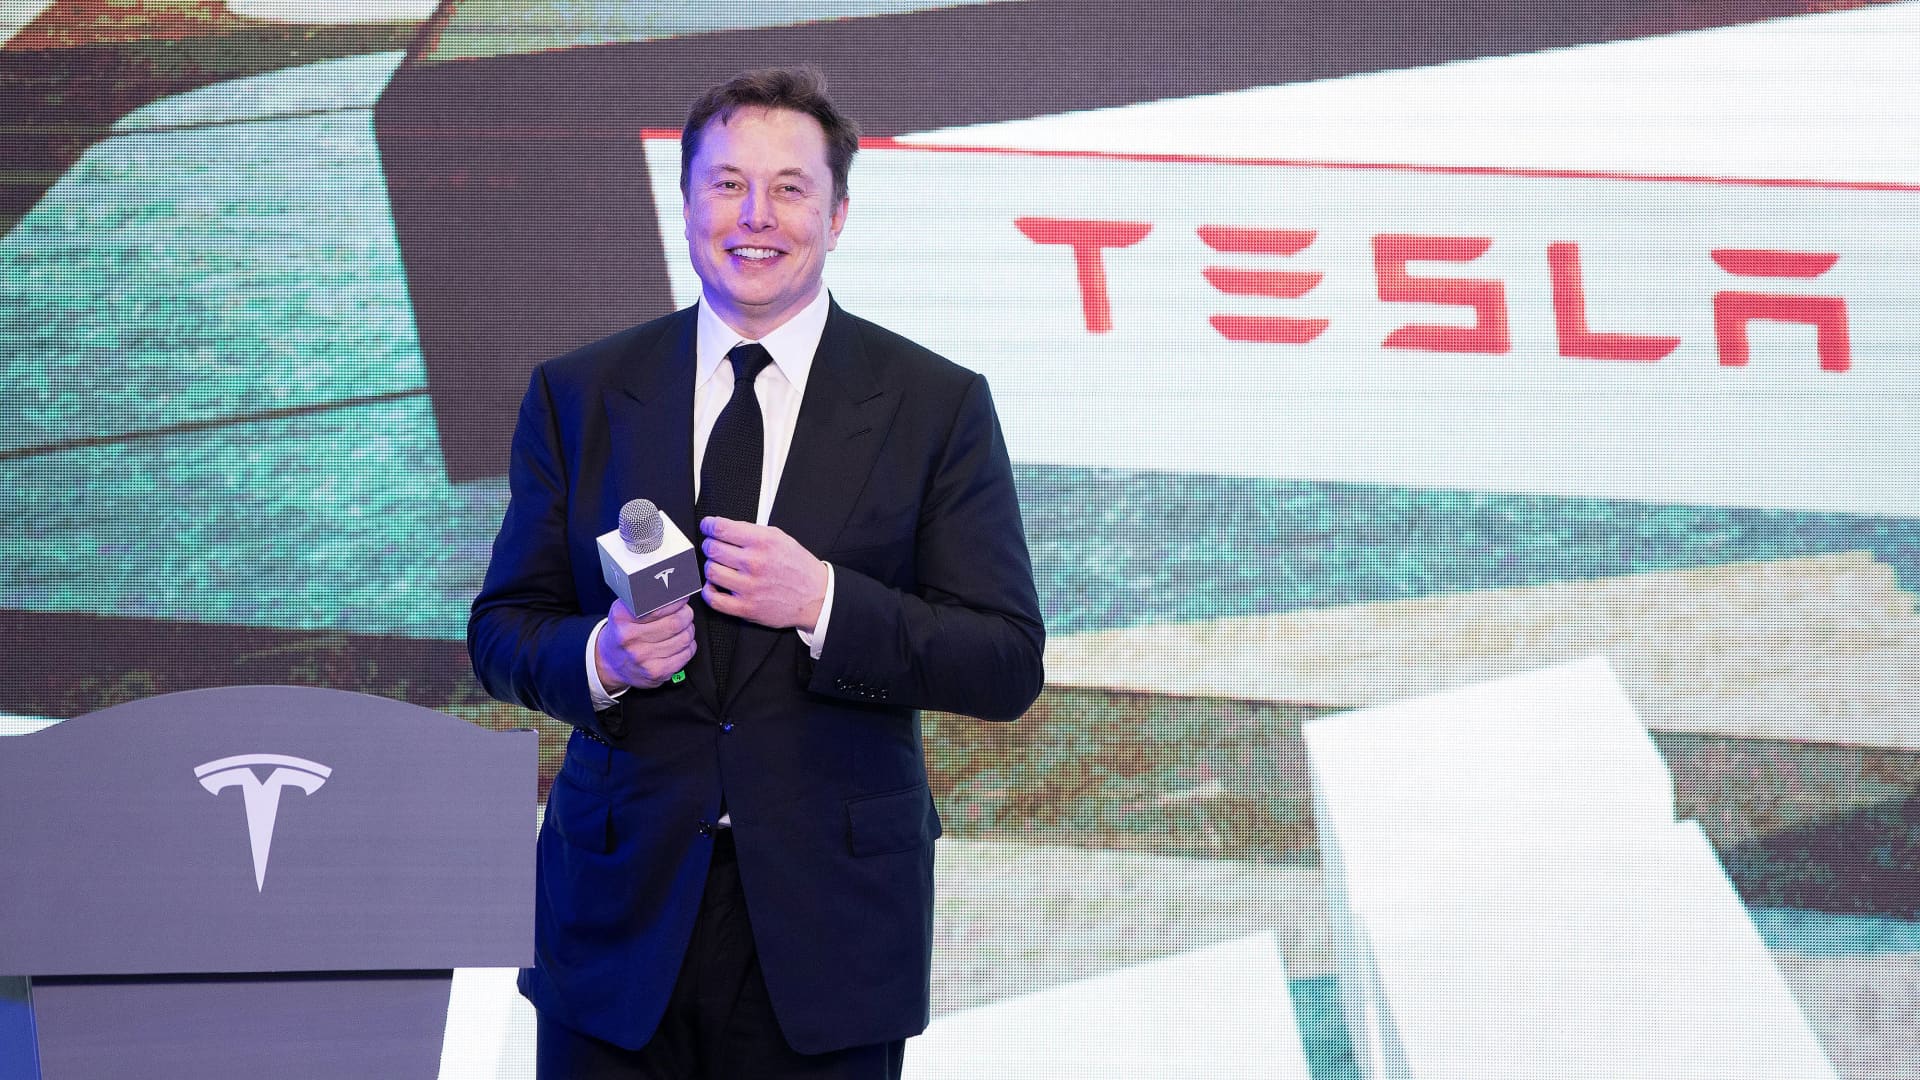 Tesla CEO Elon Musk meets China's foreign minister, touts expansion